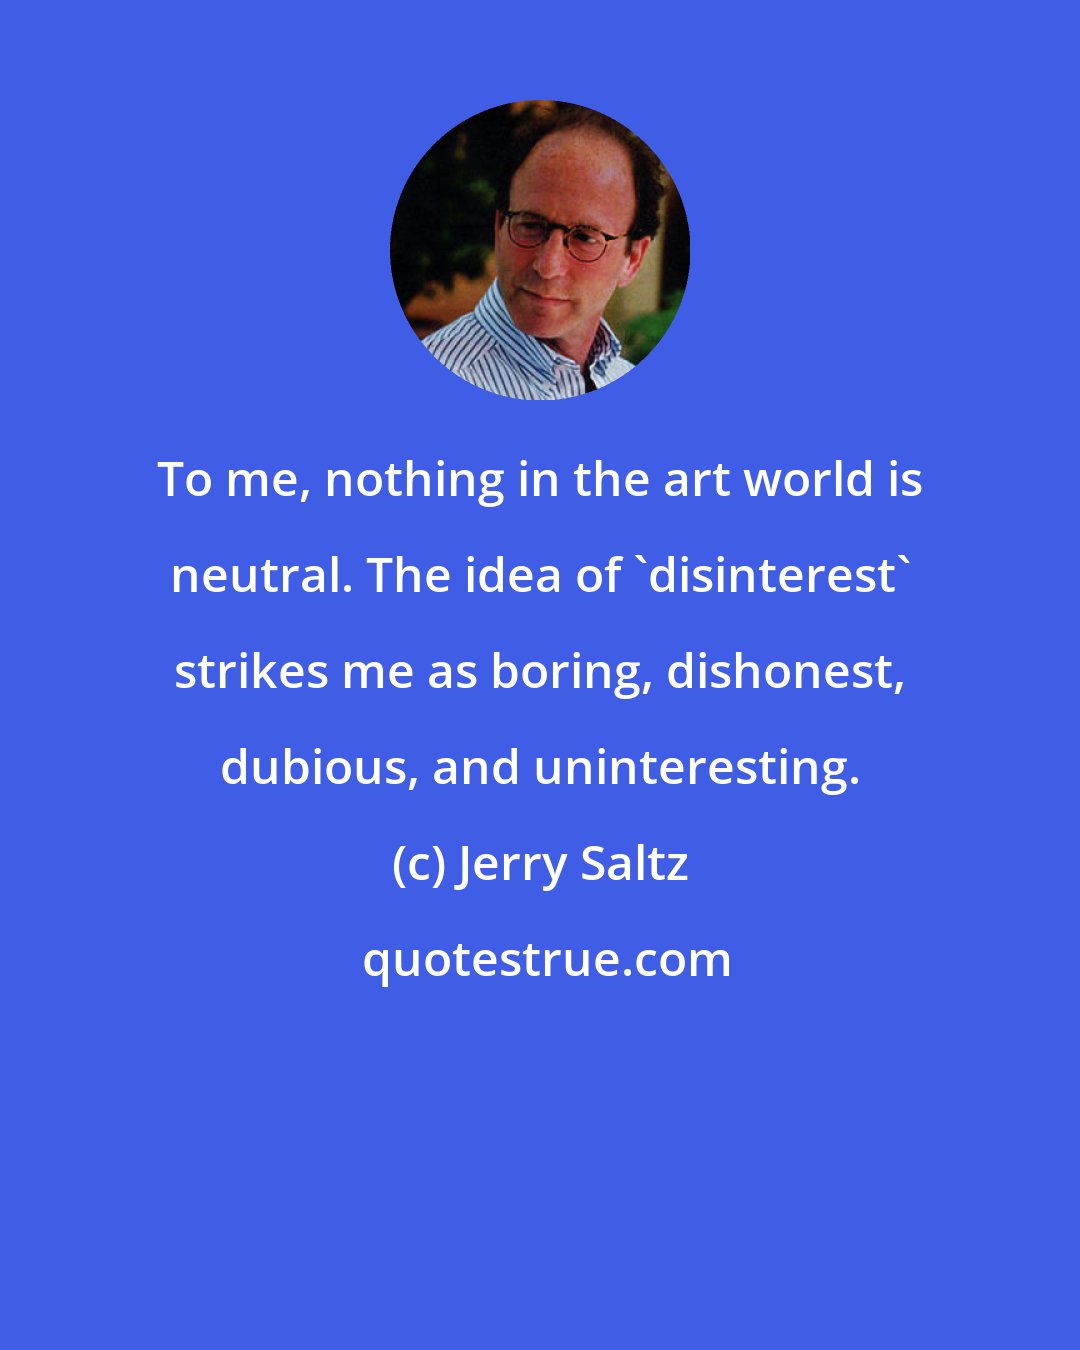 Jerry Saltz: To me, nothing in the art world is neutral. The idea of 'disinterest' strikes me as boring, dishonest, dubious, and uninteresting.